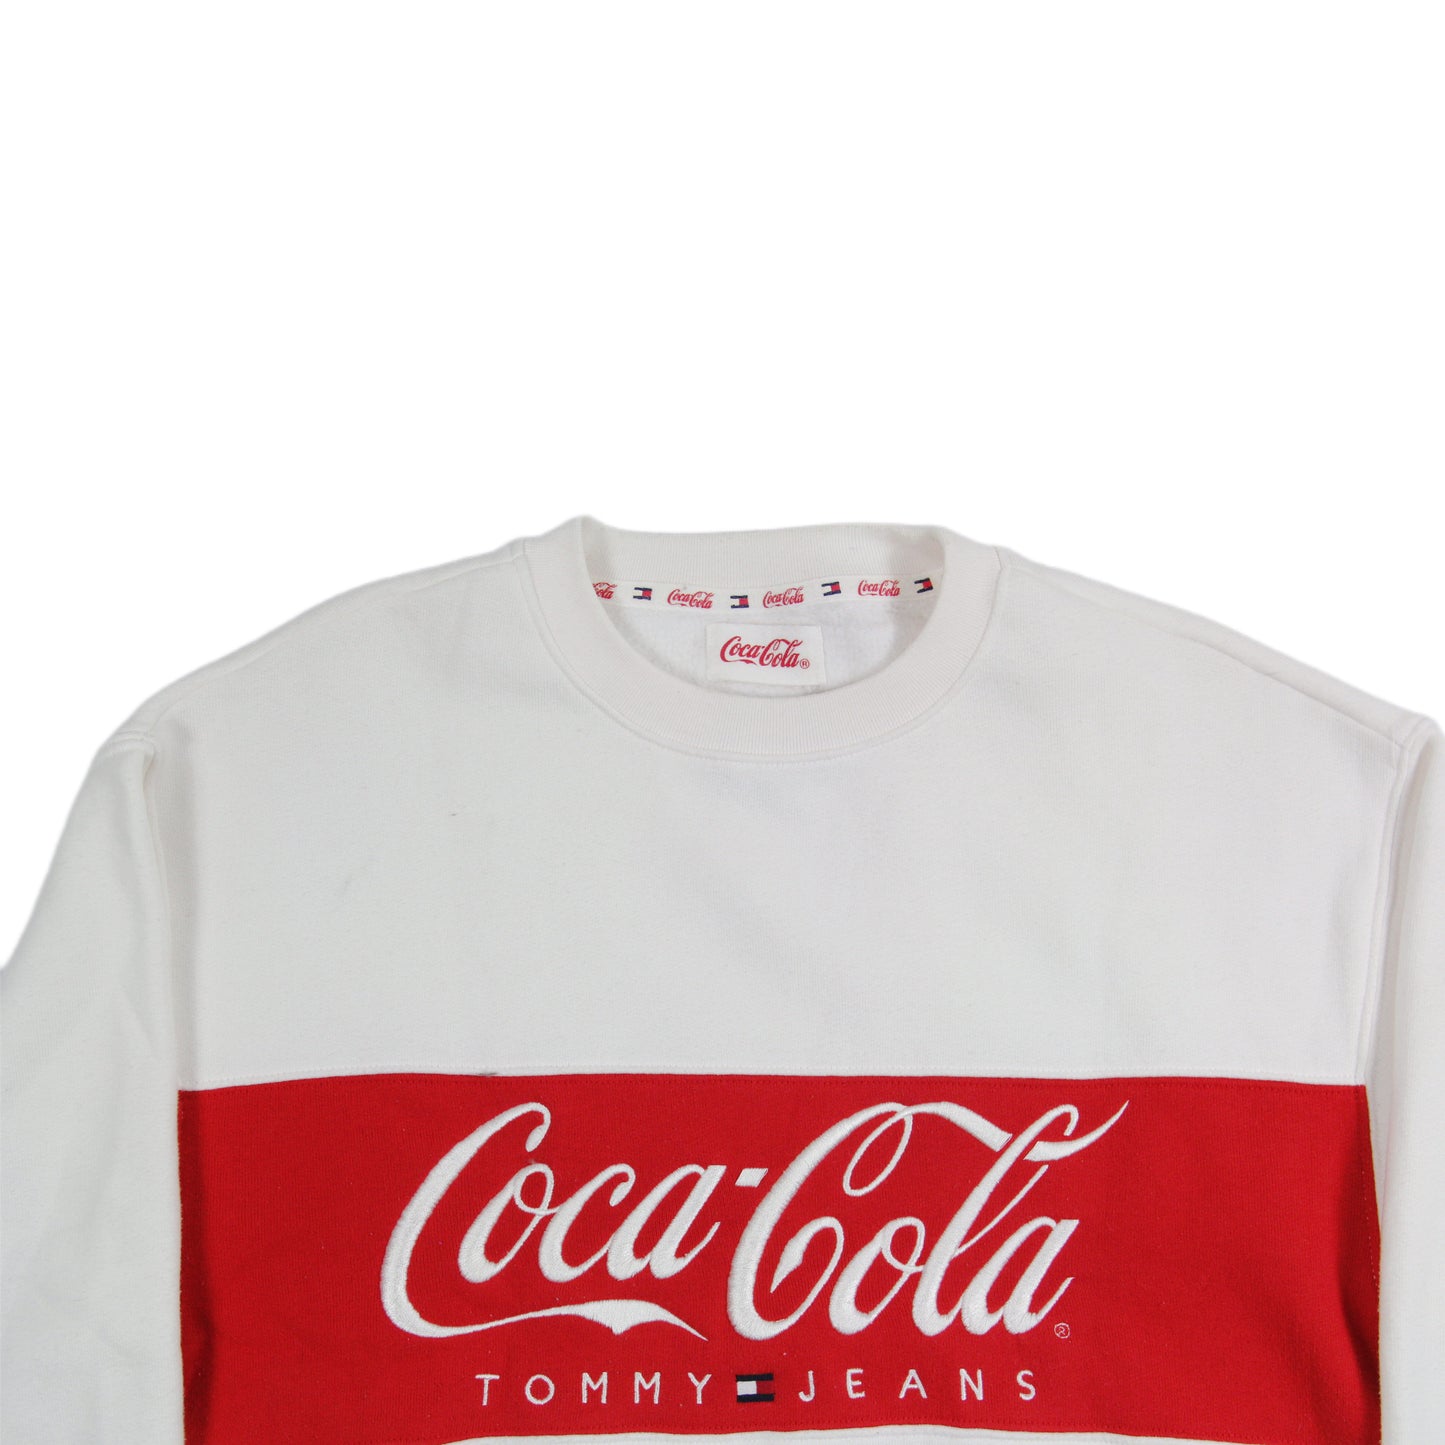 Coca Cola Tommy Jeans Sweater white red